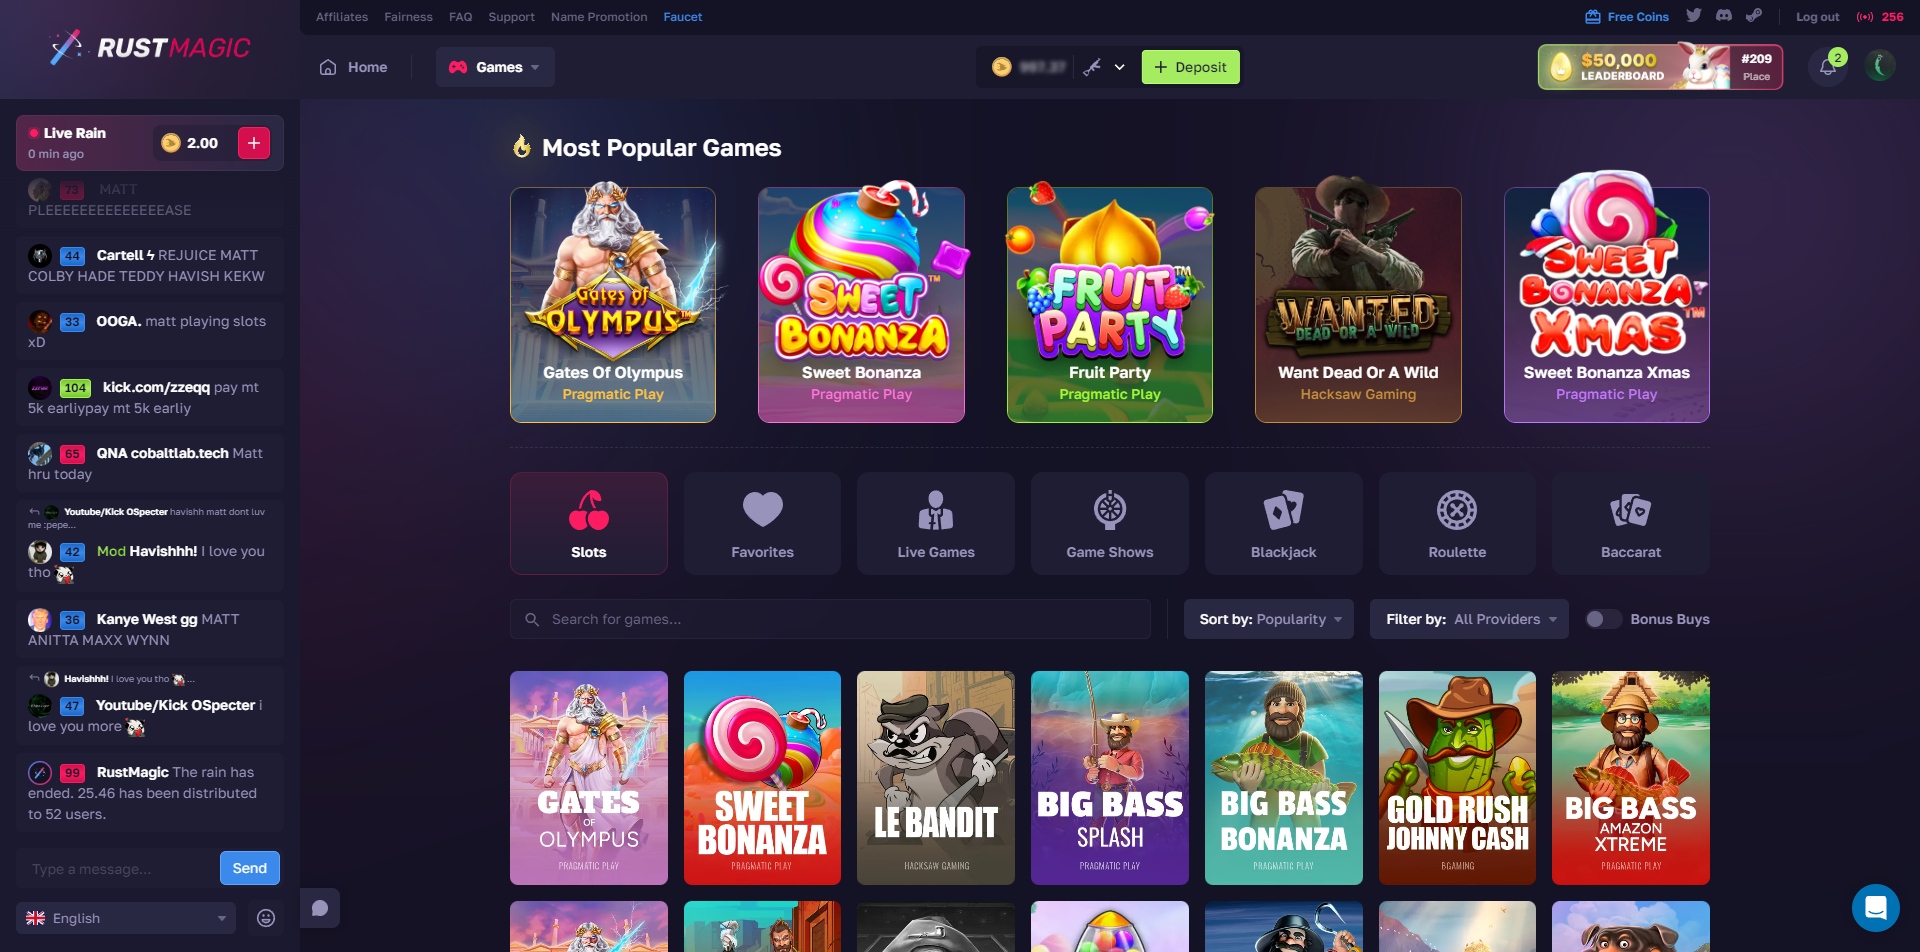 RustMagic Slots and Live Games Overview